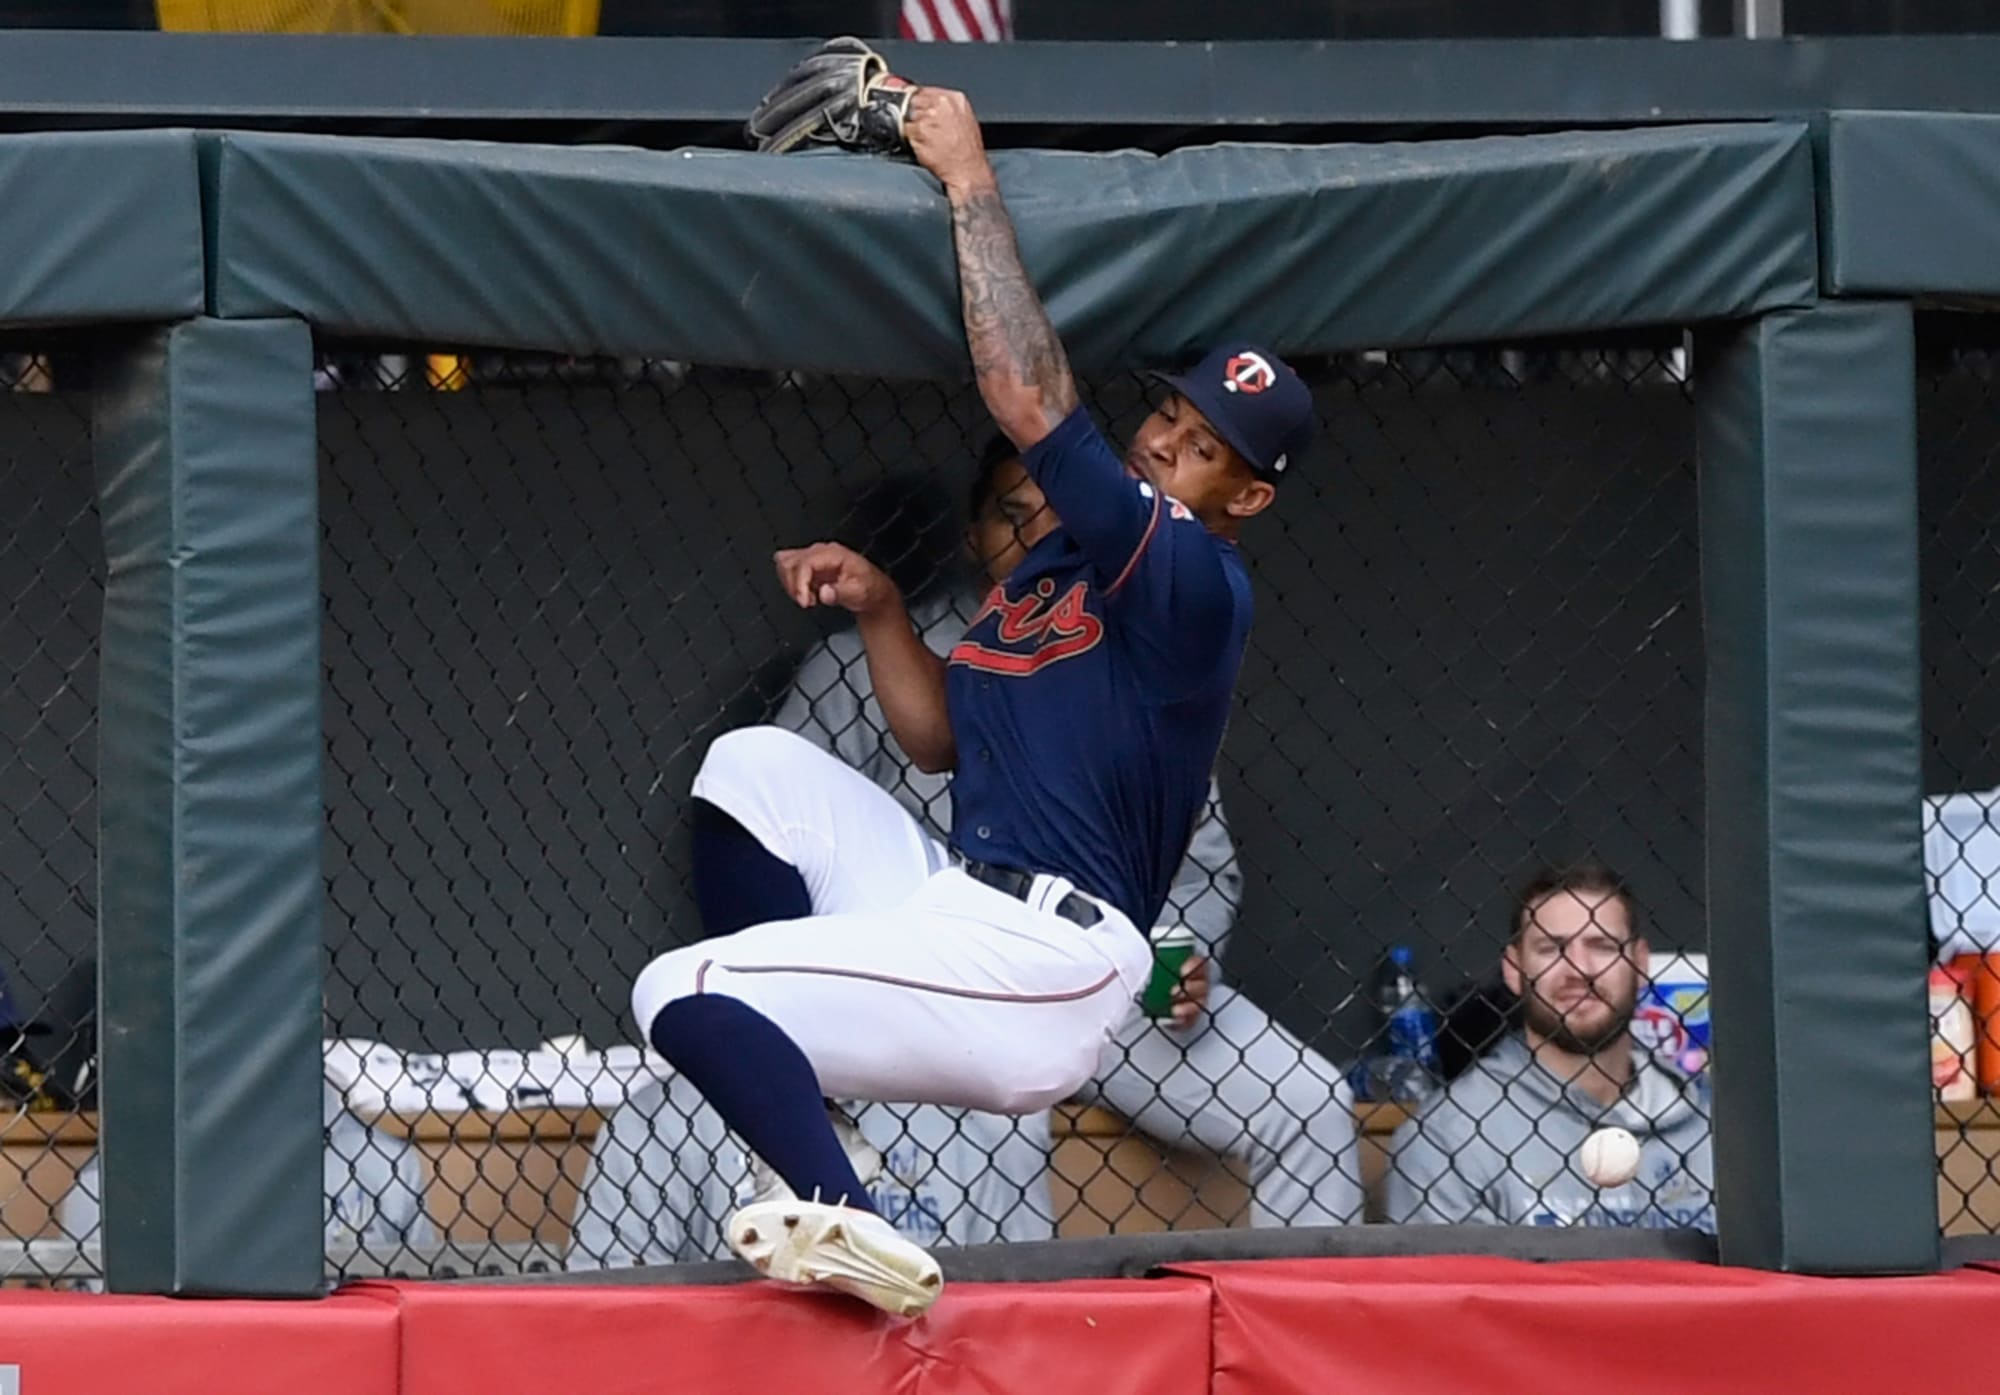 As the Twins' DH, Byron Buxton on pace to play career high in games -  InForum